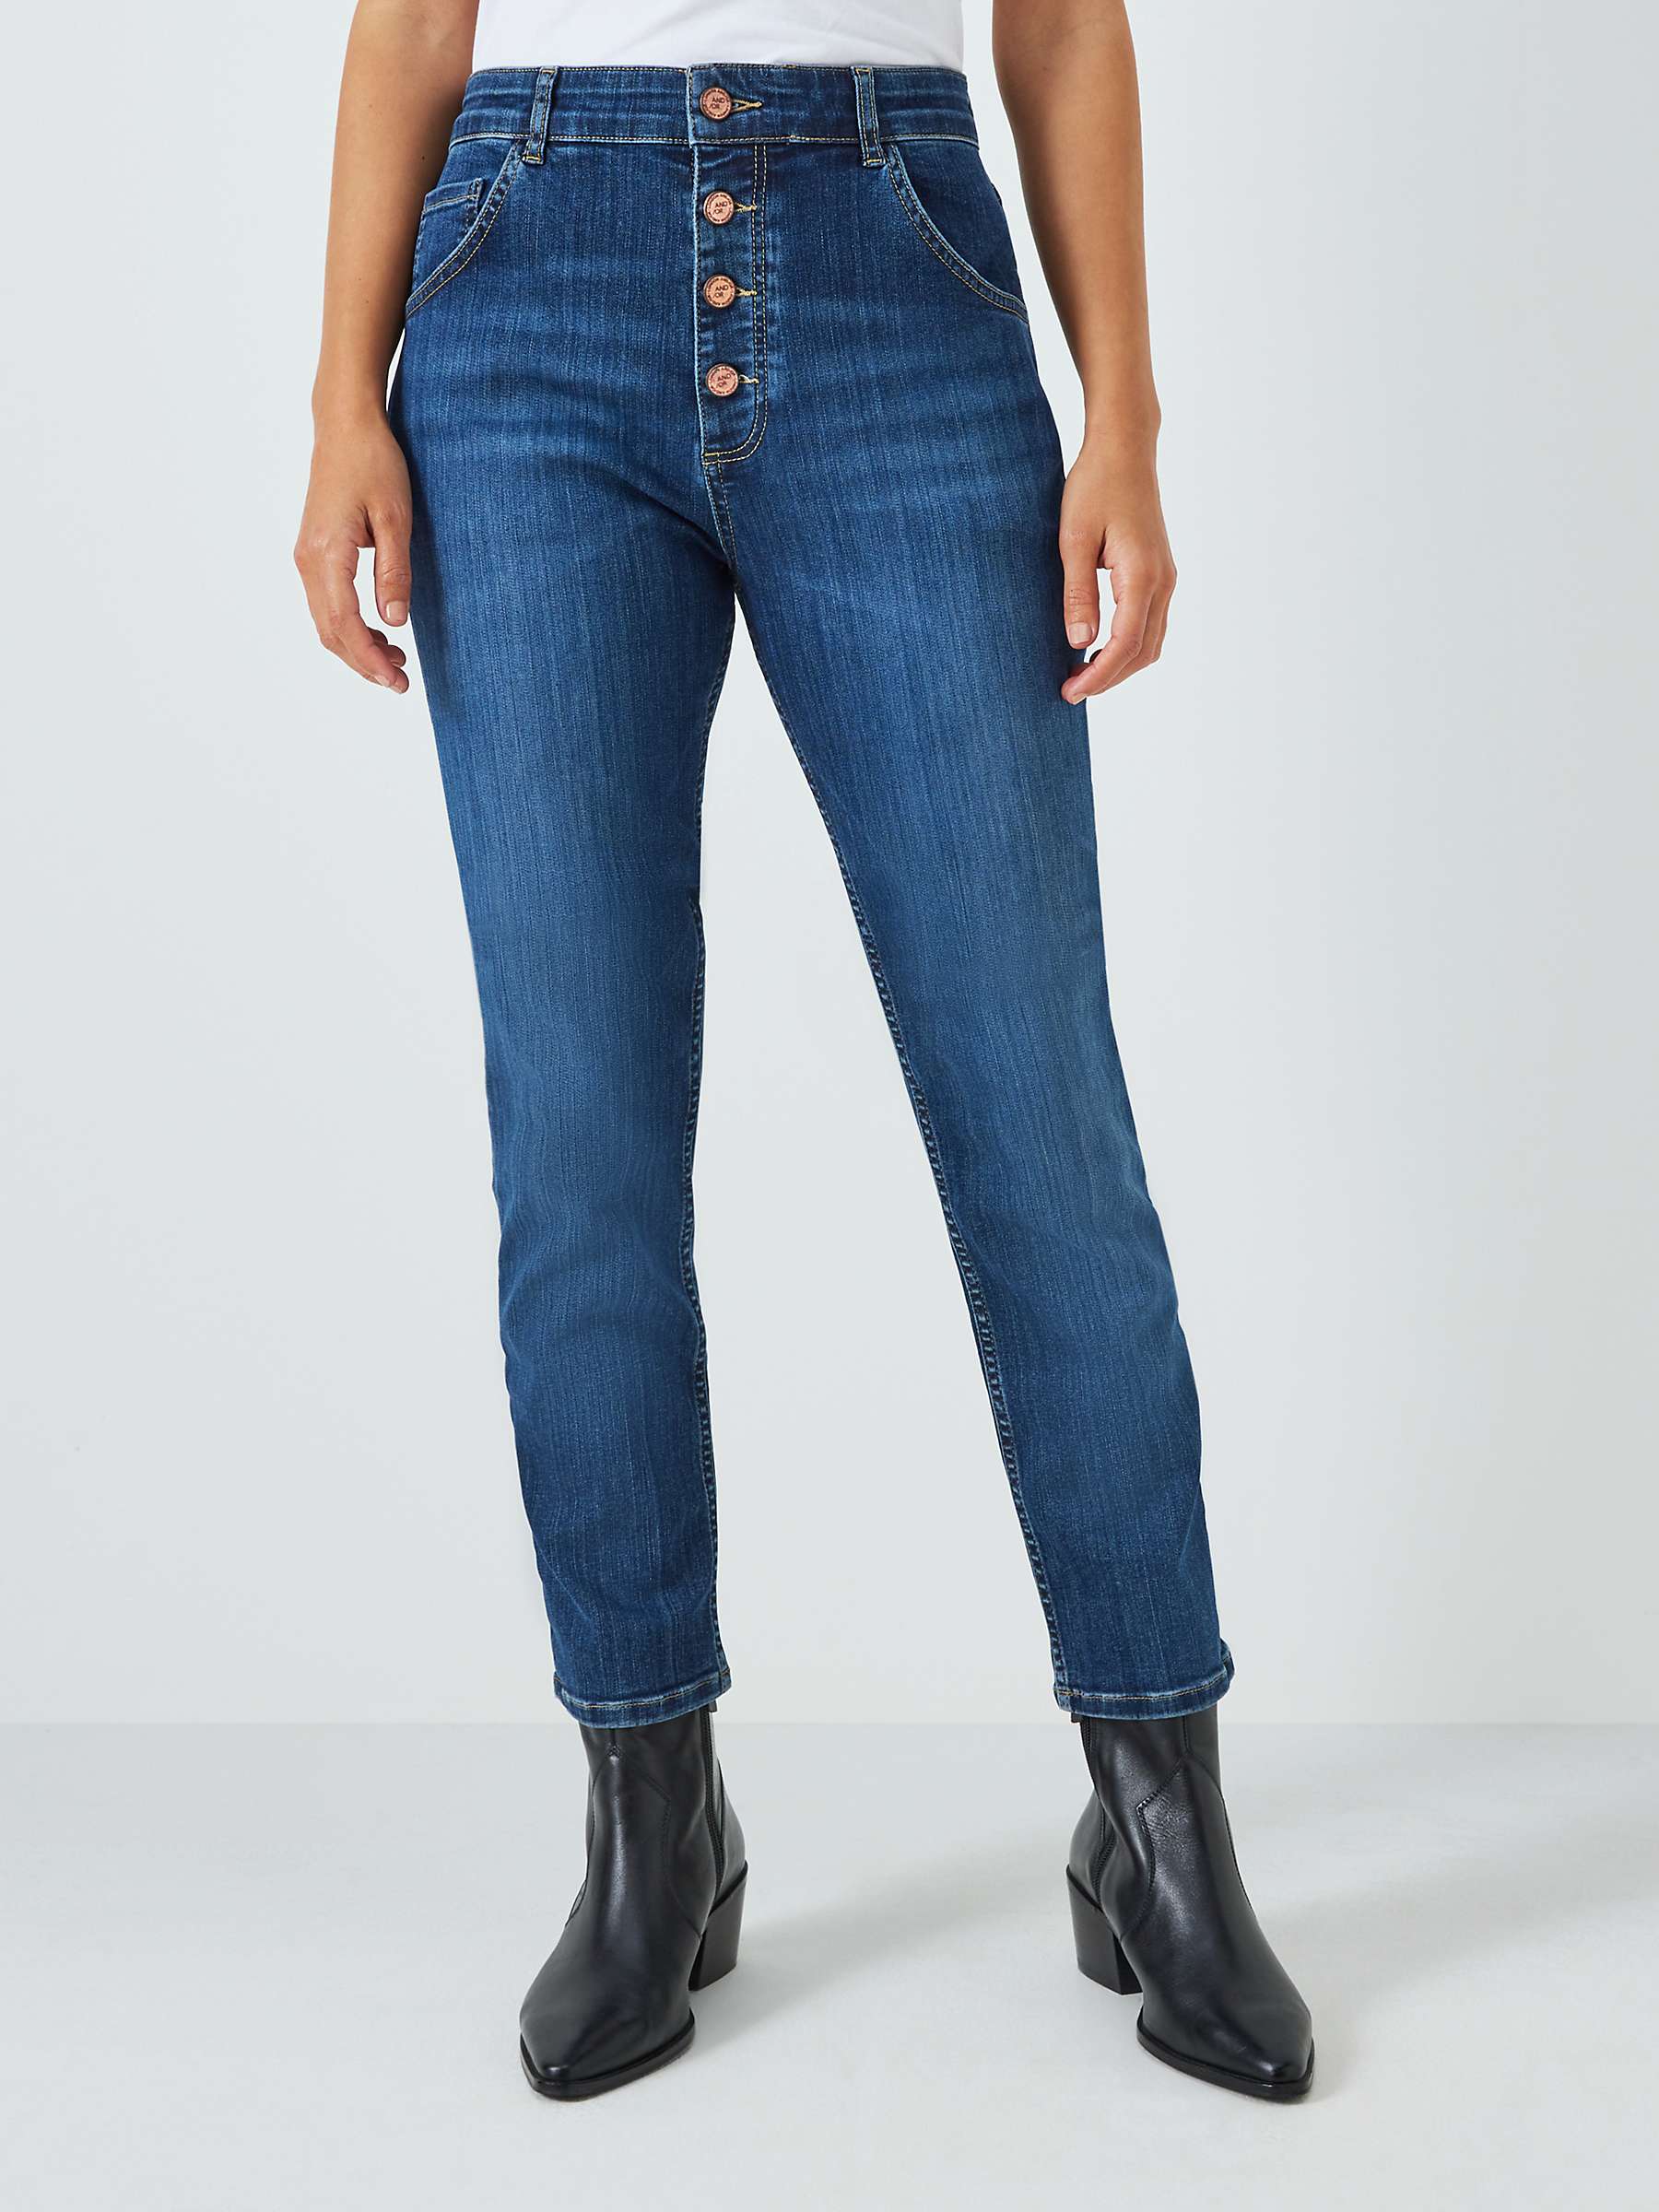 Buy AND/OR Venice Beach Boyfriend Jeans, Vintage Perfected Online at johnlewis.com